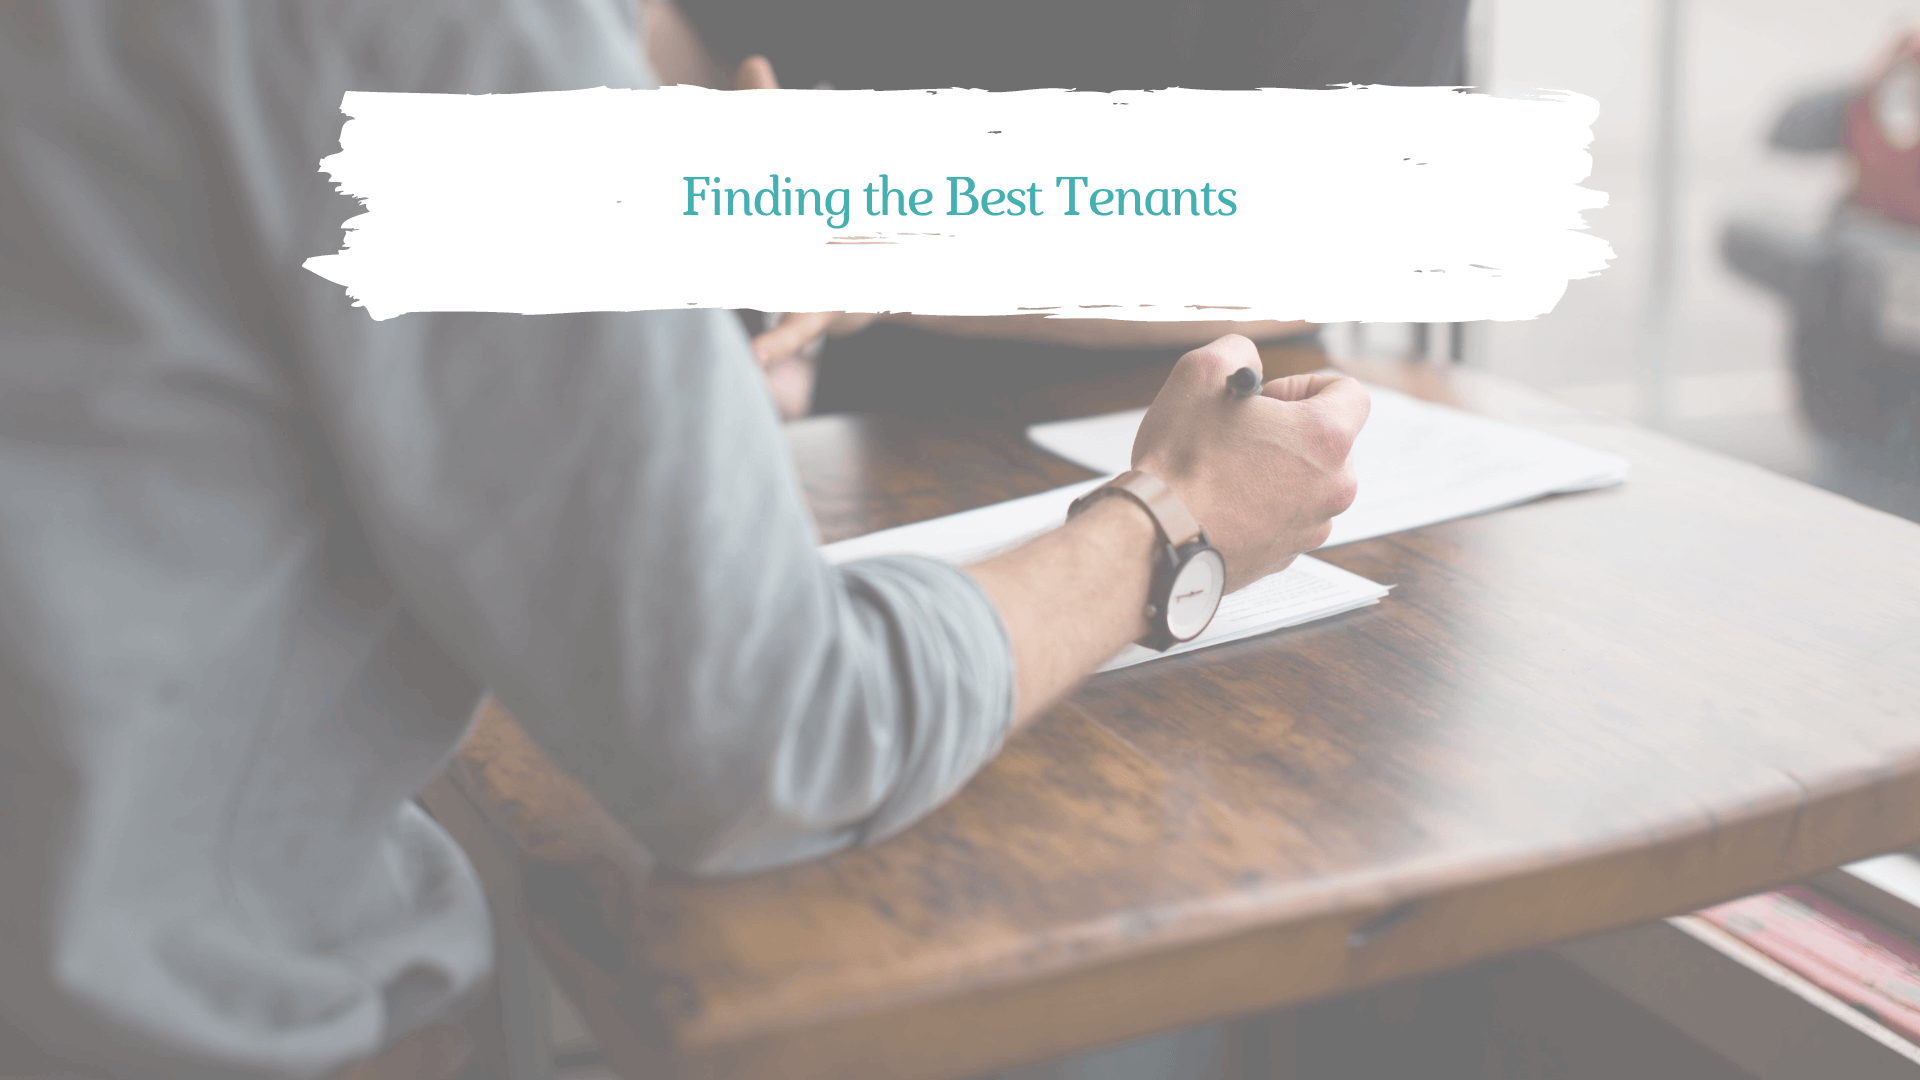 Screening to Find the Best Tenants for Your Lakewood Ranch Home